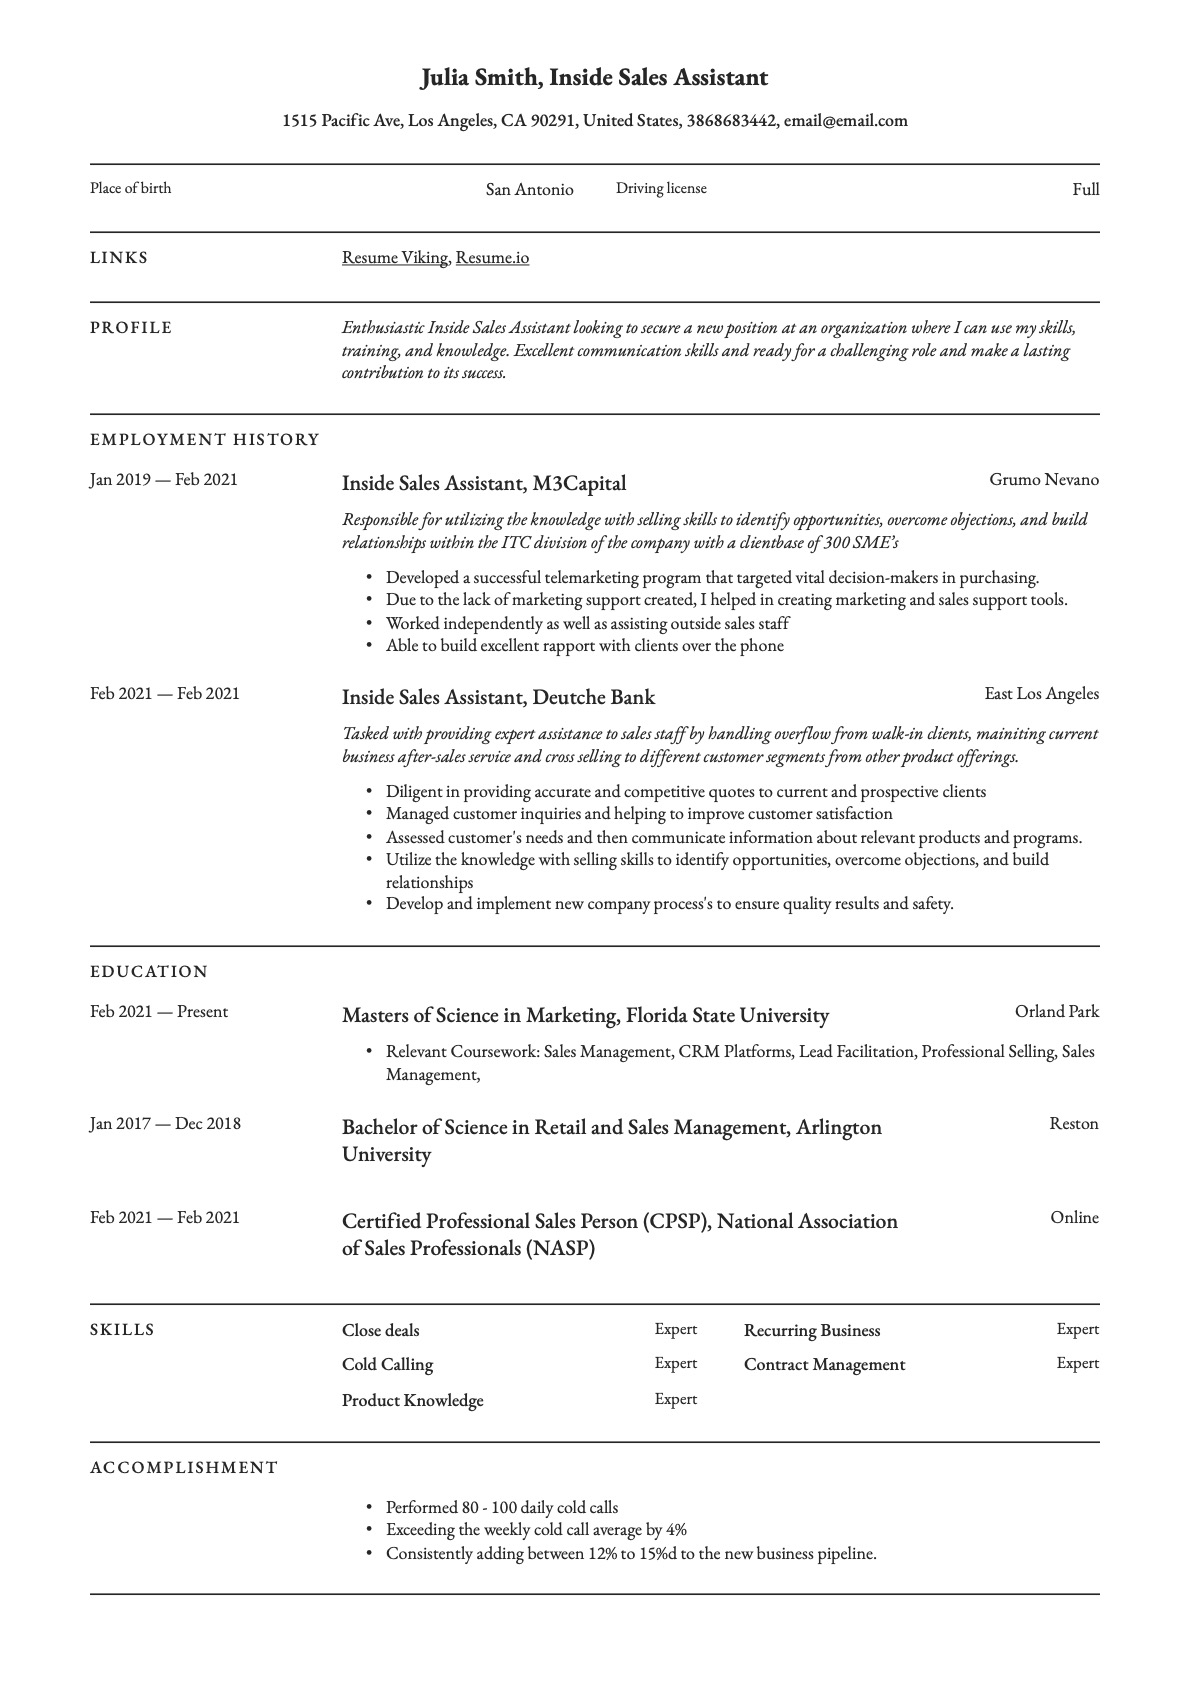 Example Resume Inside Sales Assistant-5